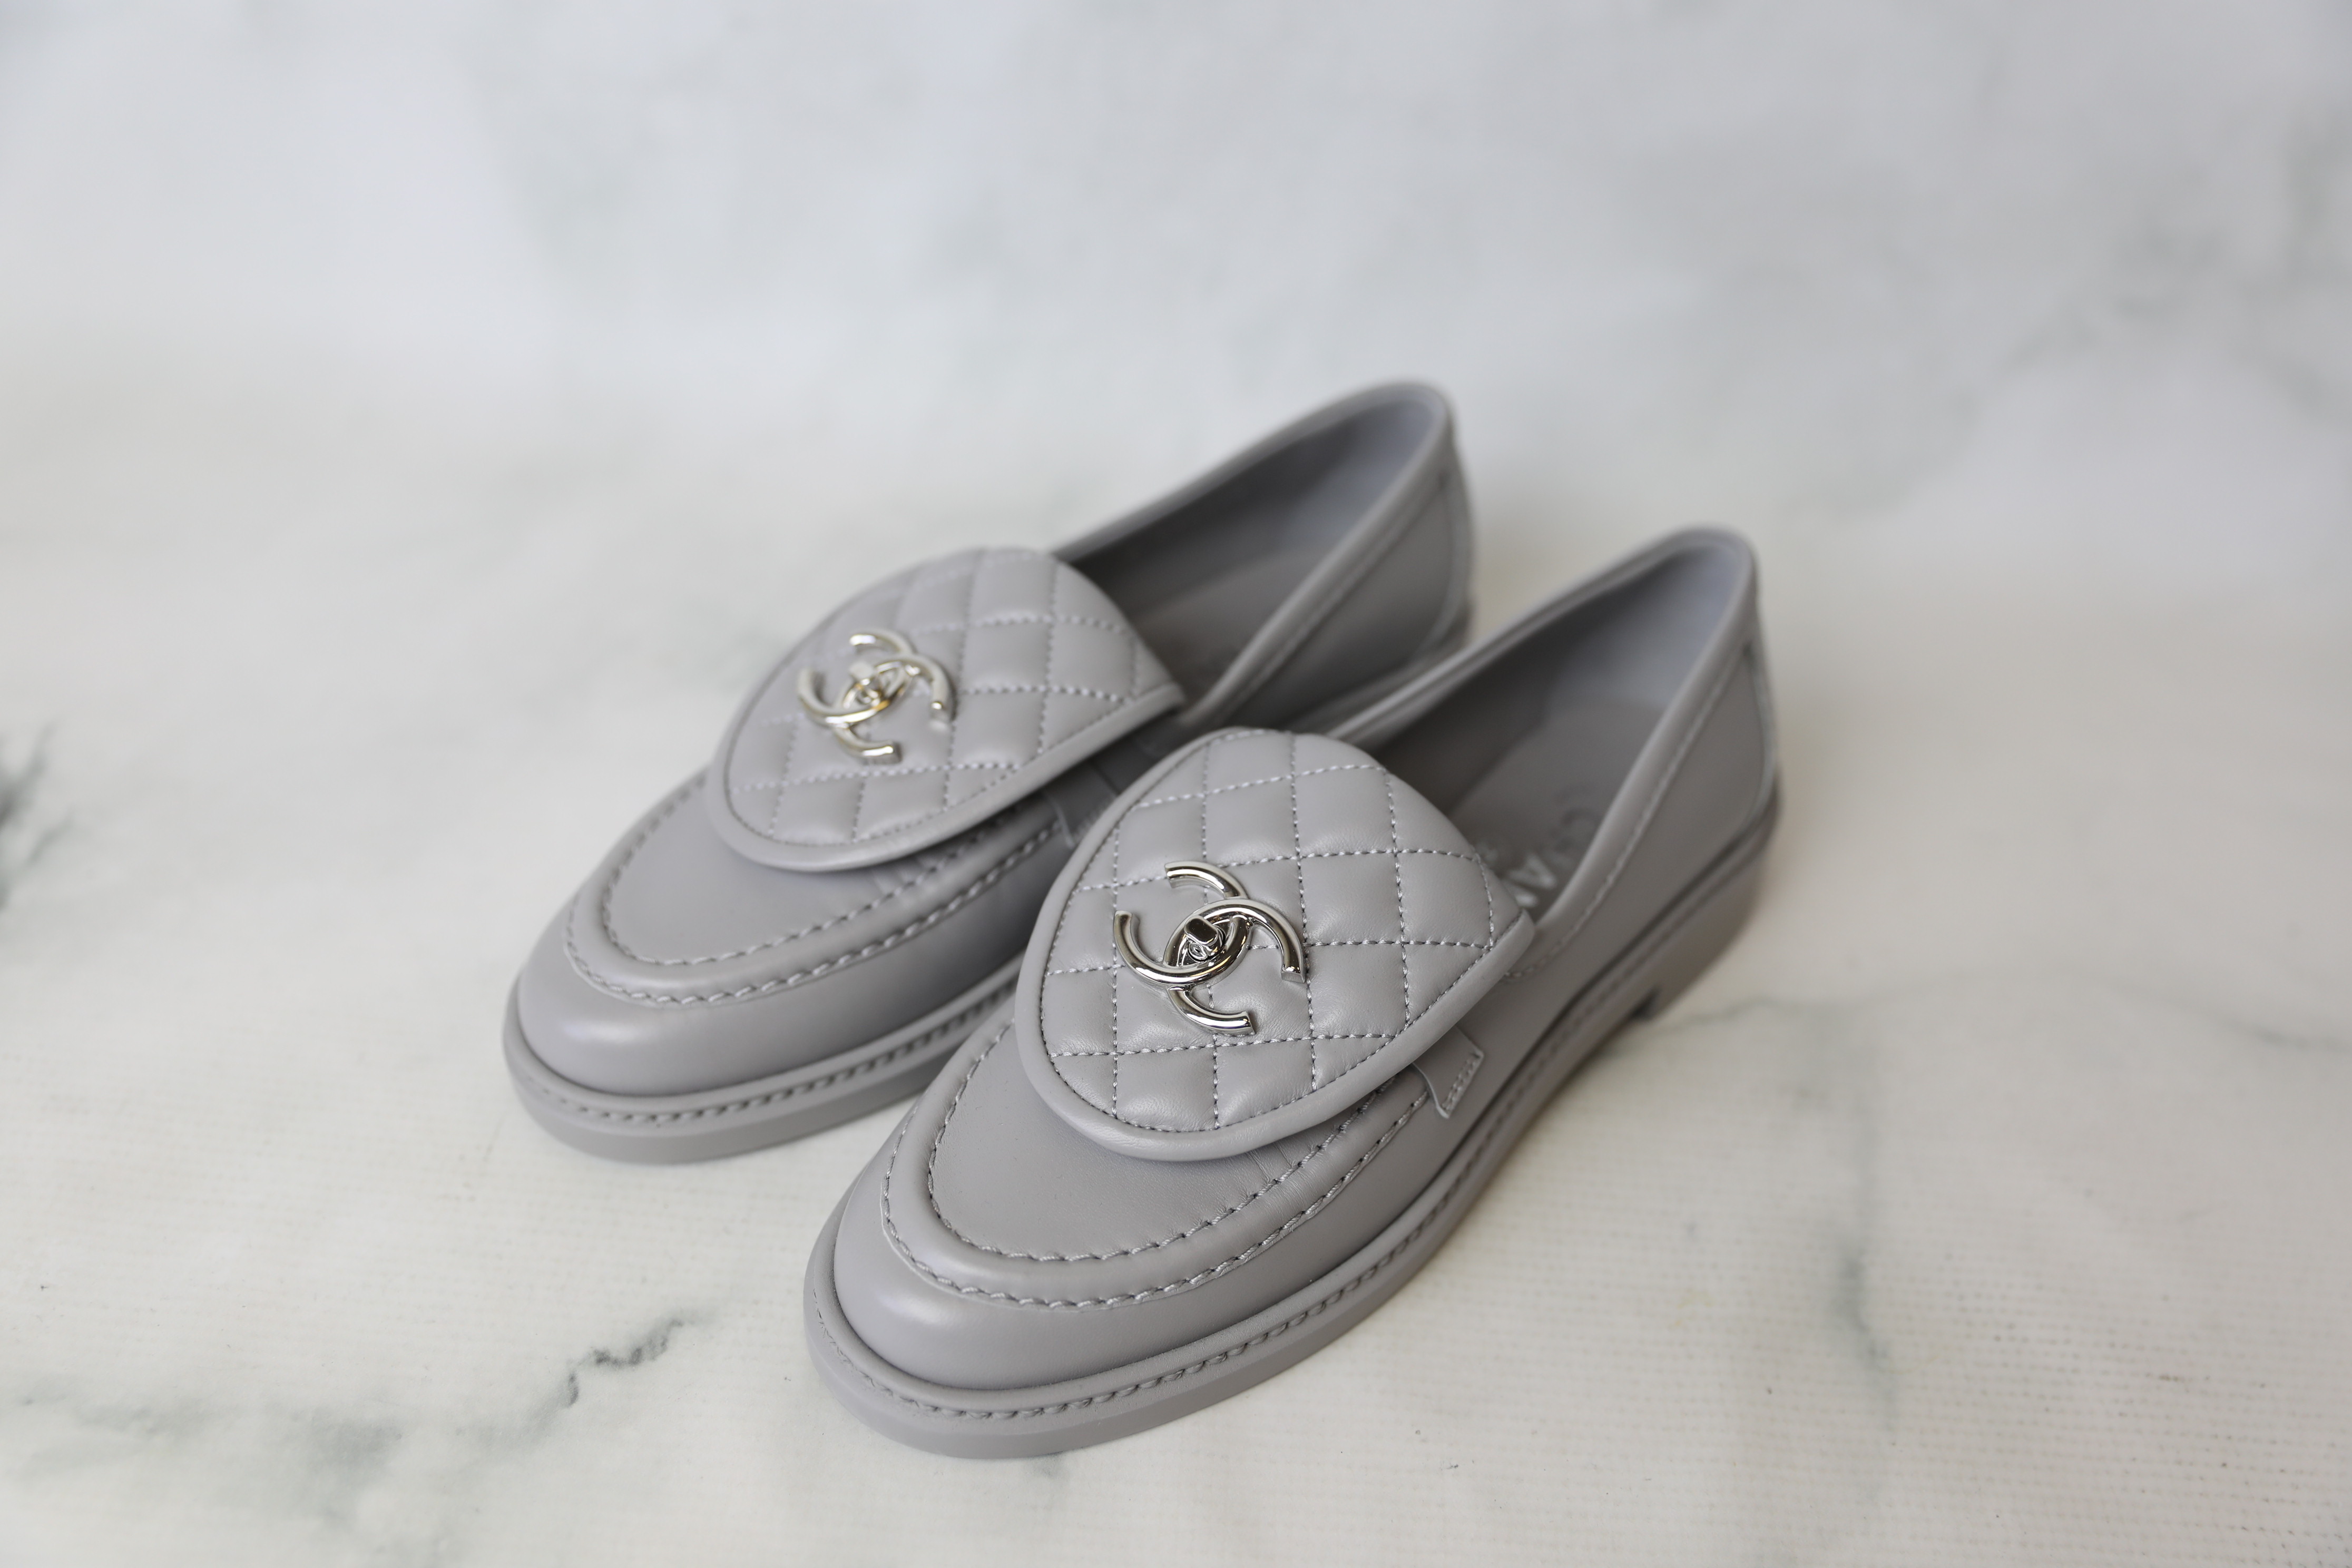 Chanel Turnlock Loafers, Grey, Size 42, New WA001